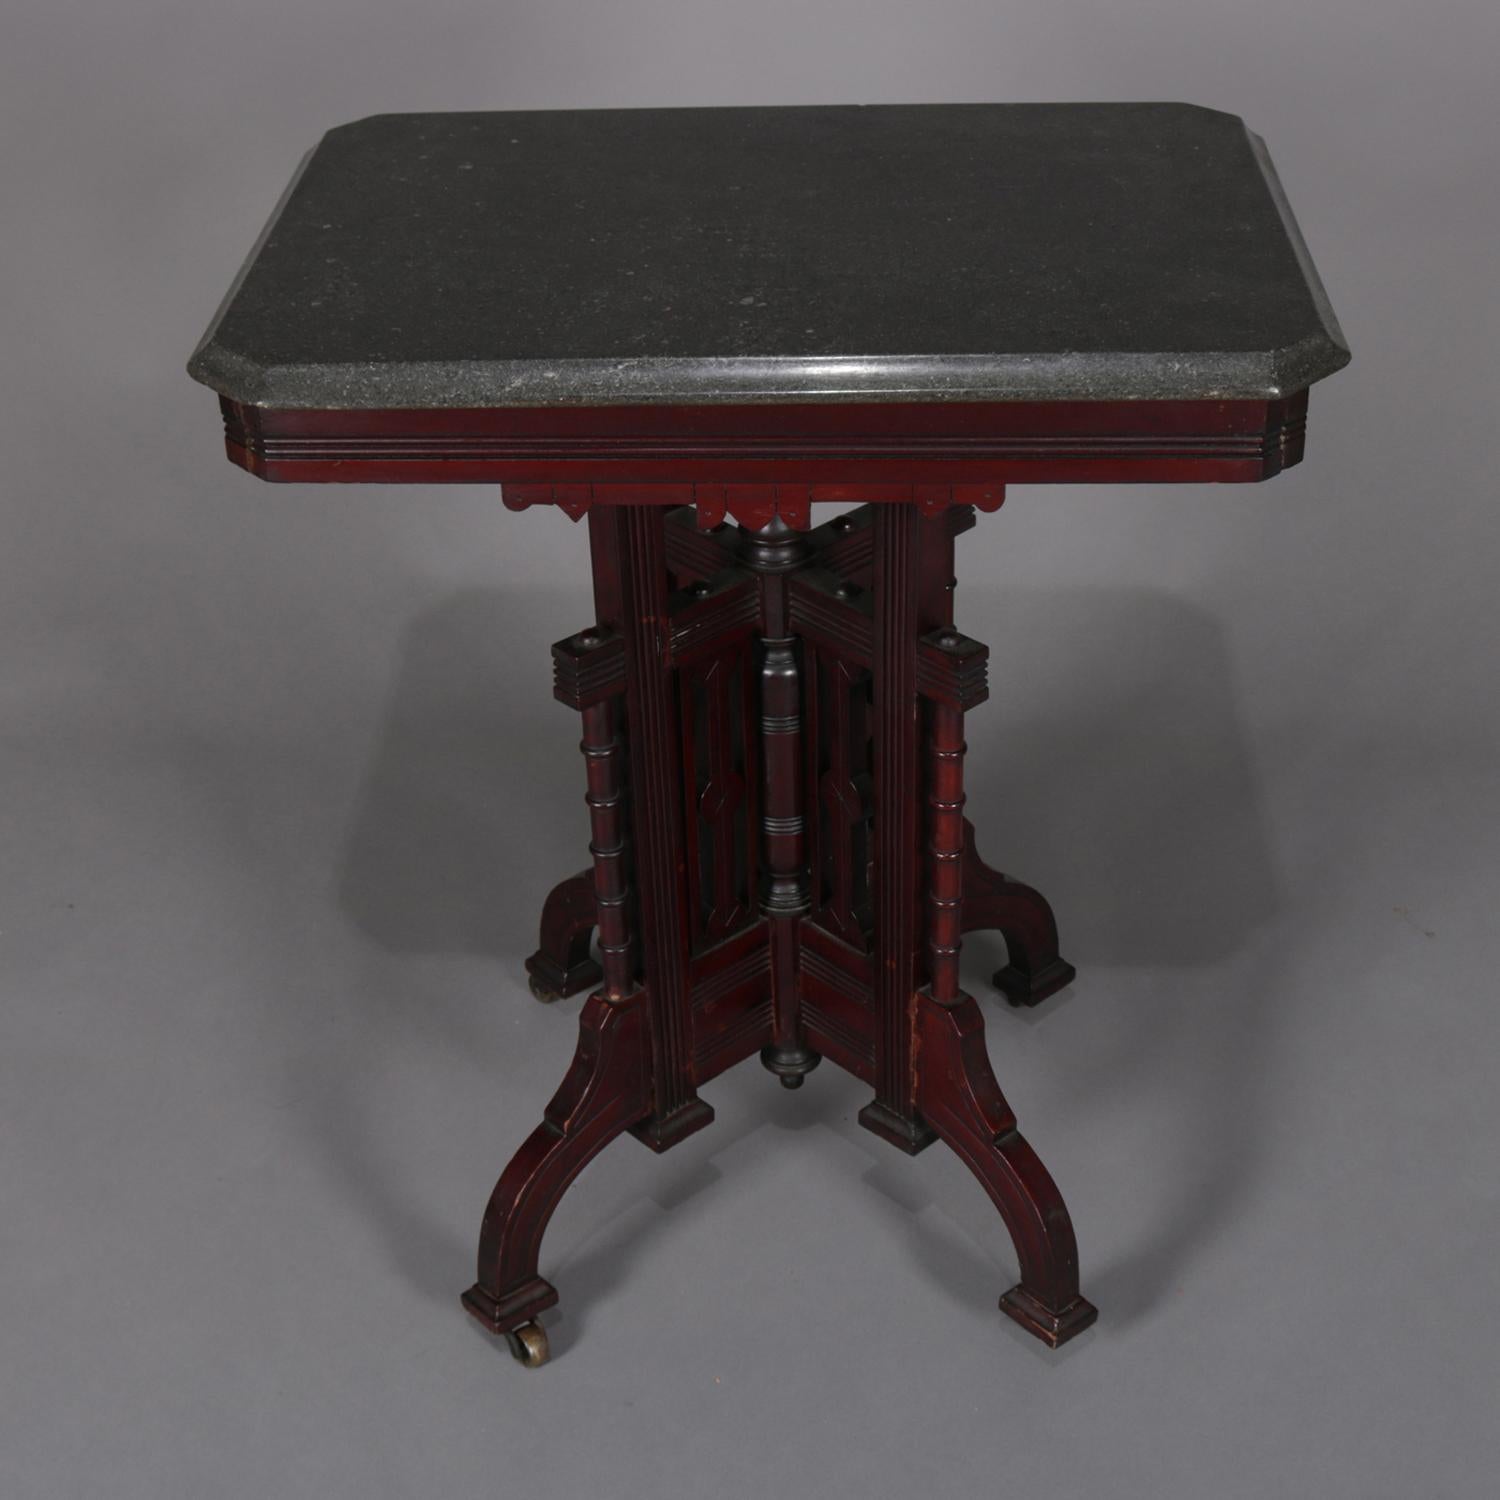 Antique Eastlake side stand features bevelled marble top seated on carved walnut base having shaped skirt above elaborate plinth with carved panels and columns and seated on four convex legs surrounding central drop finial, circa 1890.

Measures: